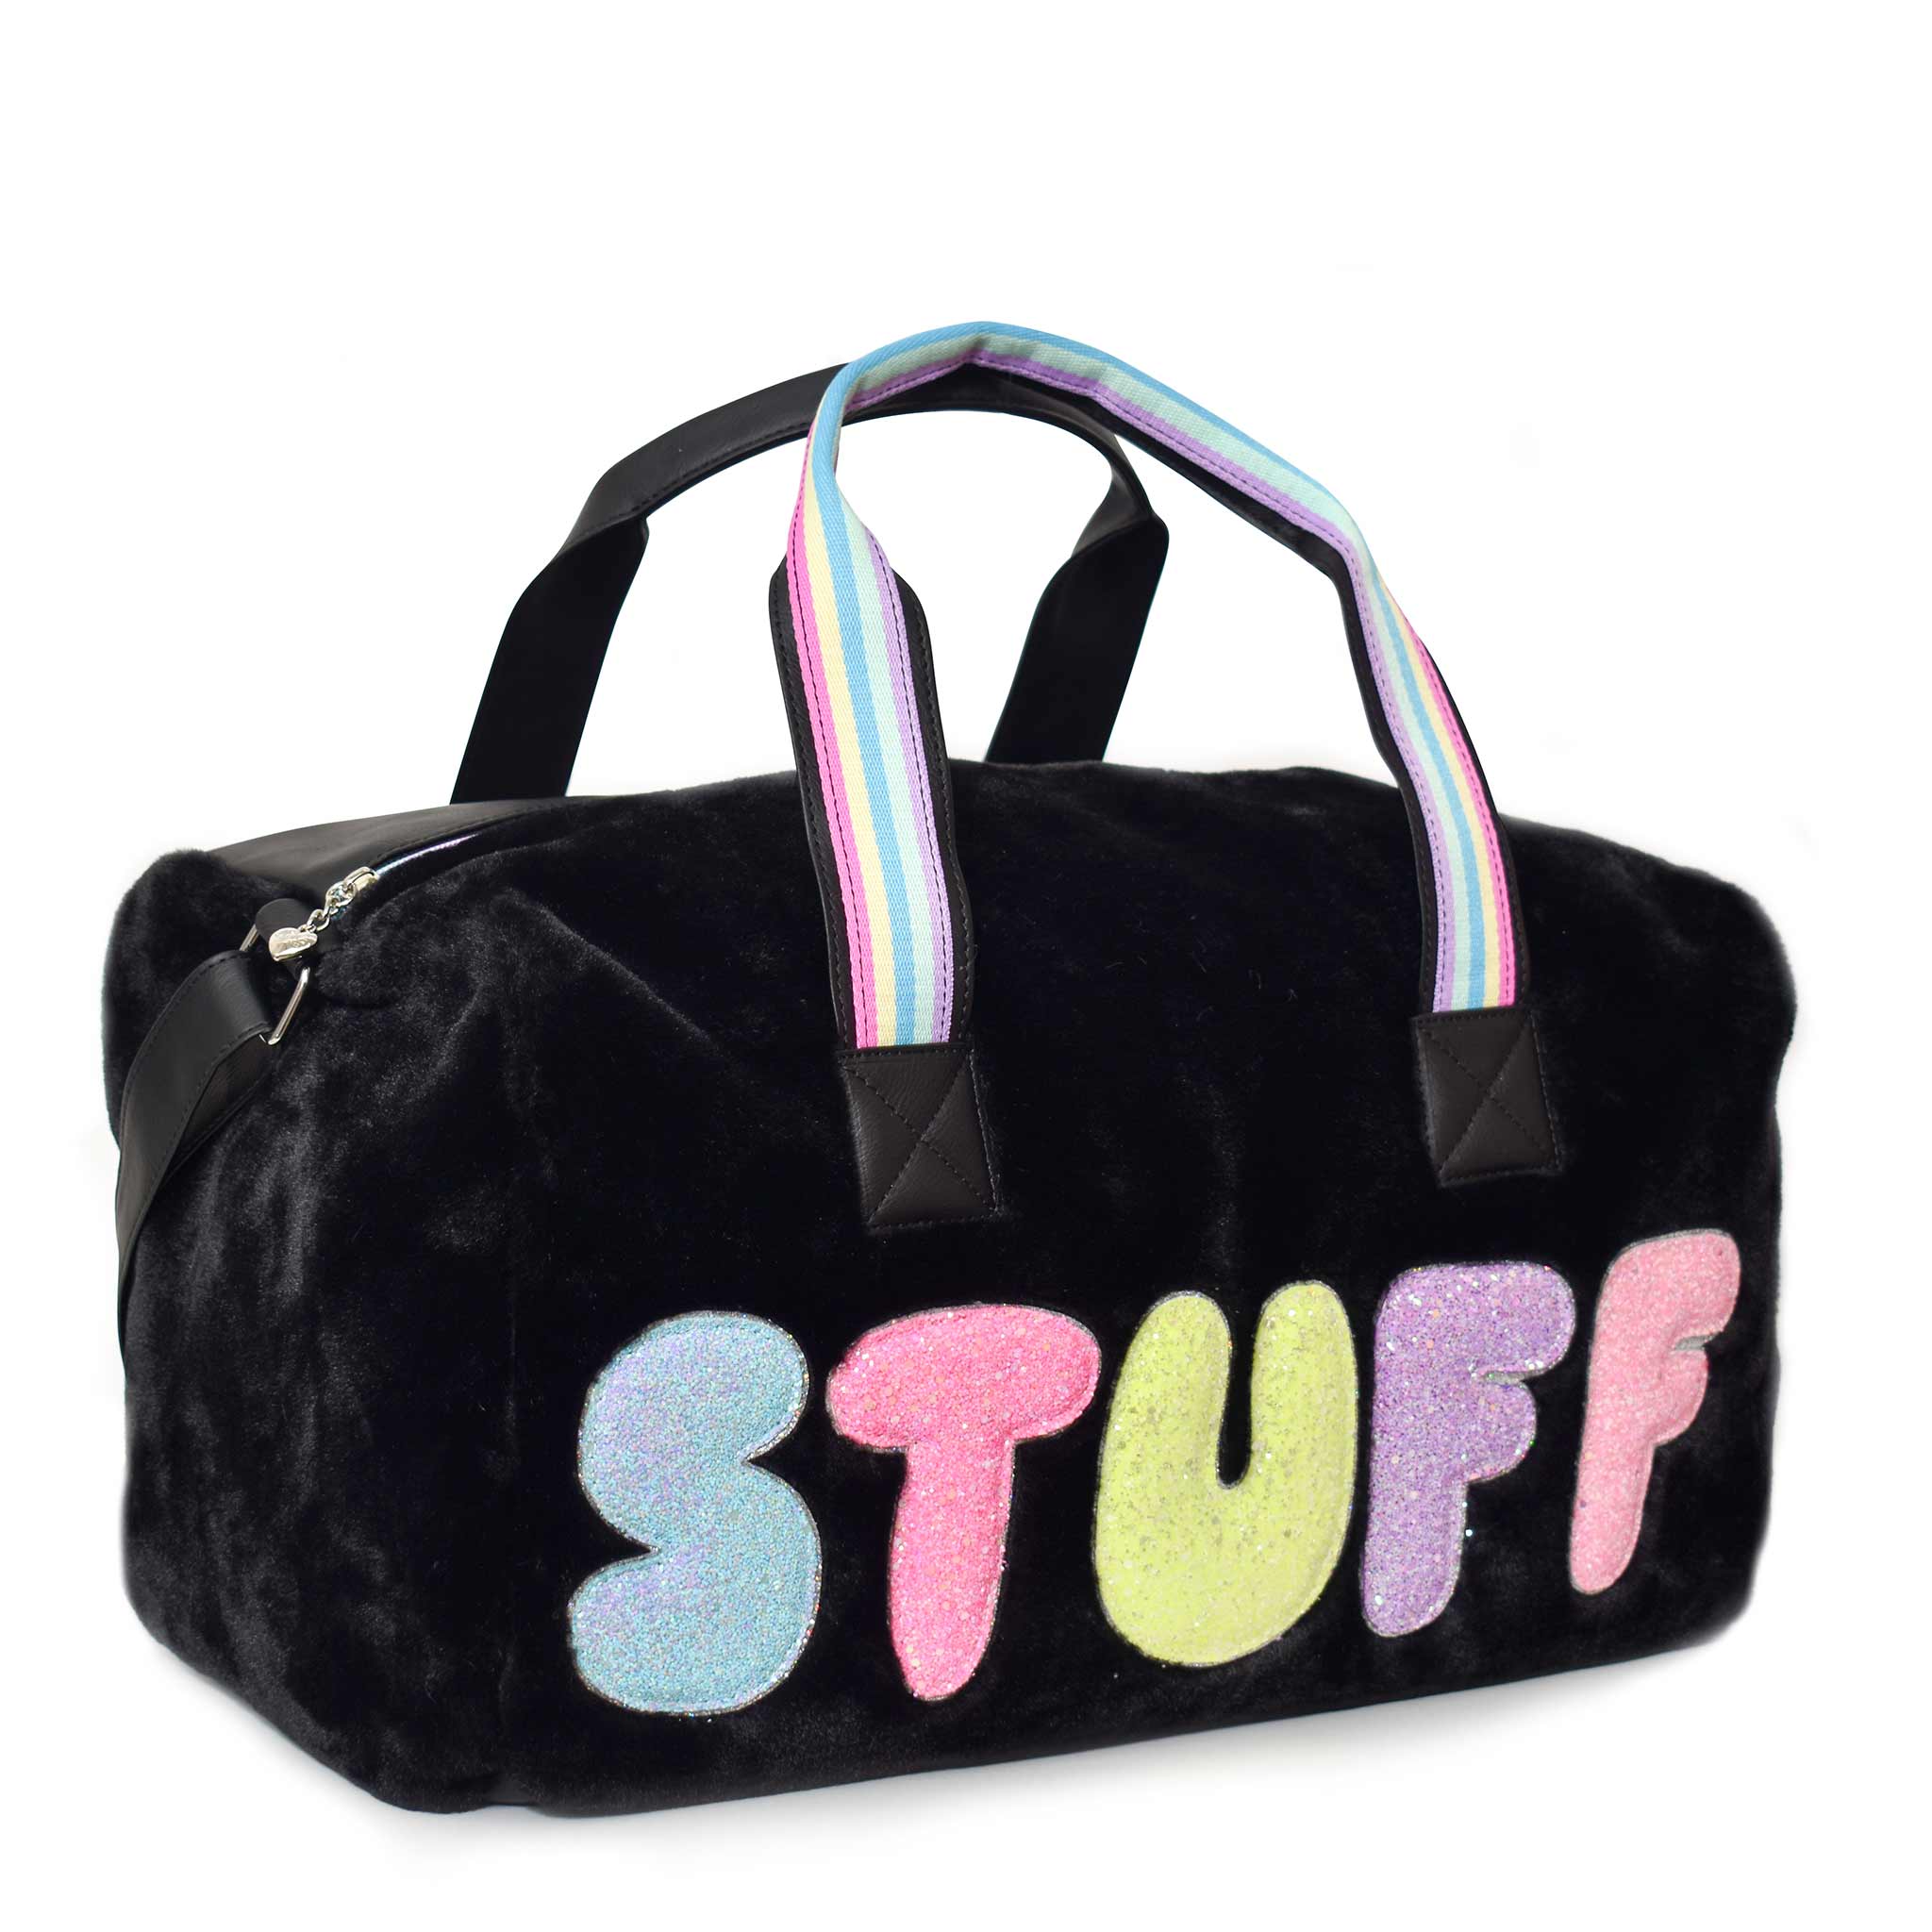 Side view of black plush large 'Stuff' duffle with glitter bubble-letter patches